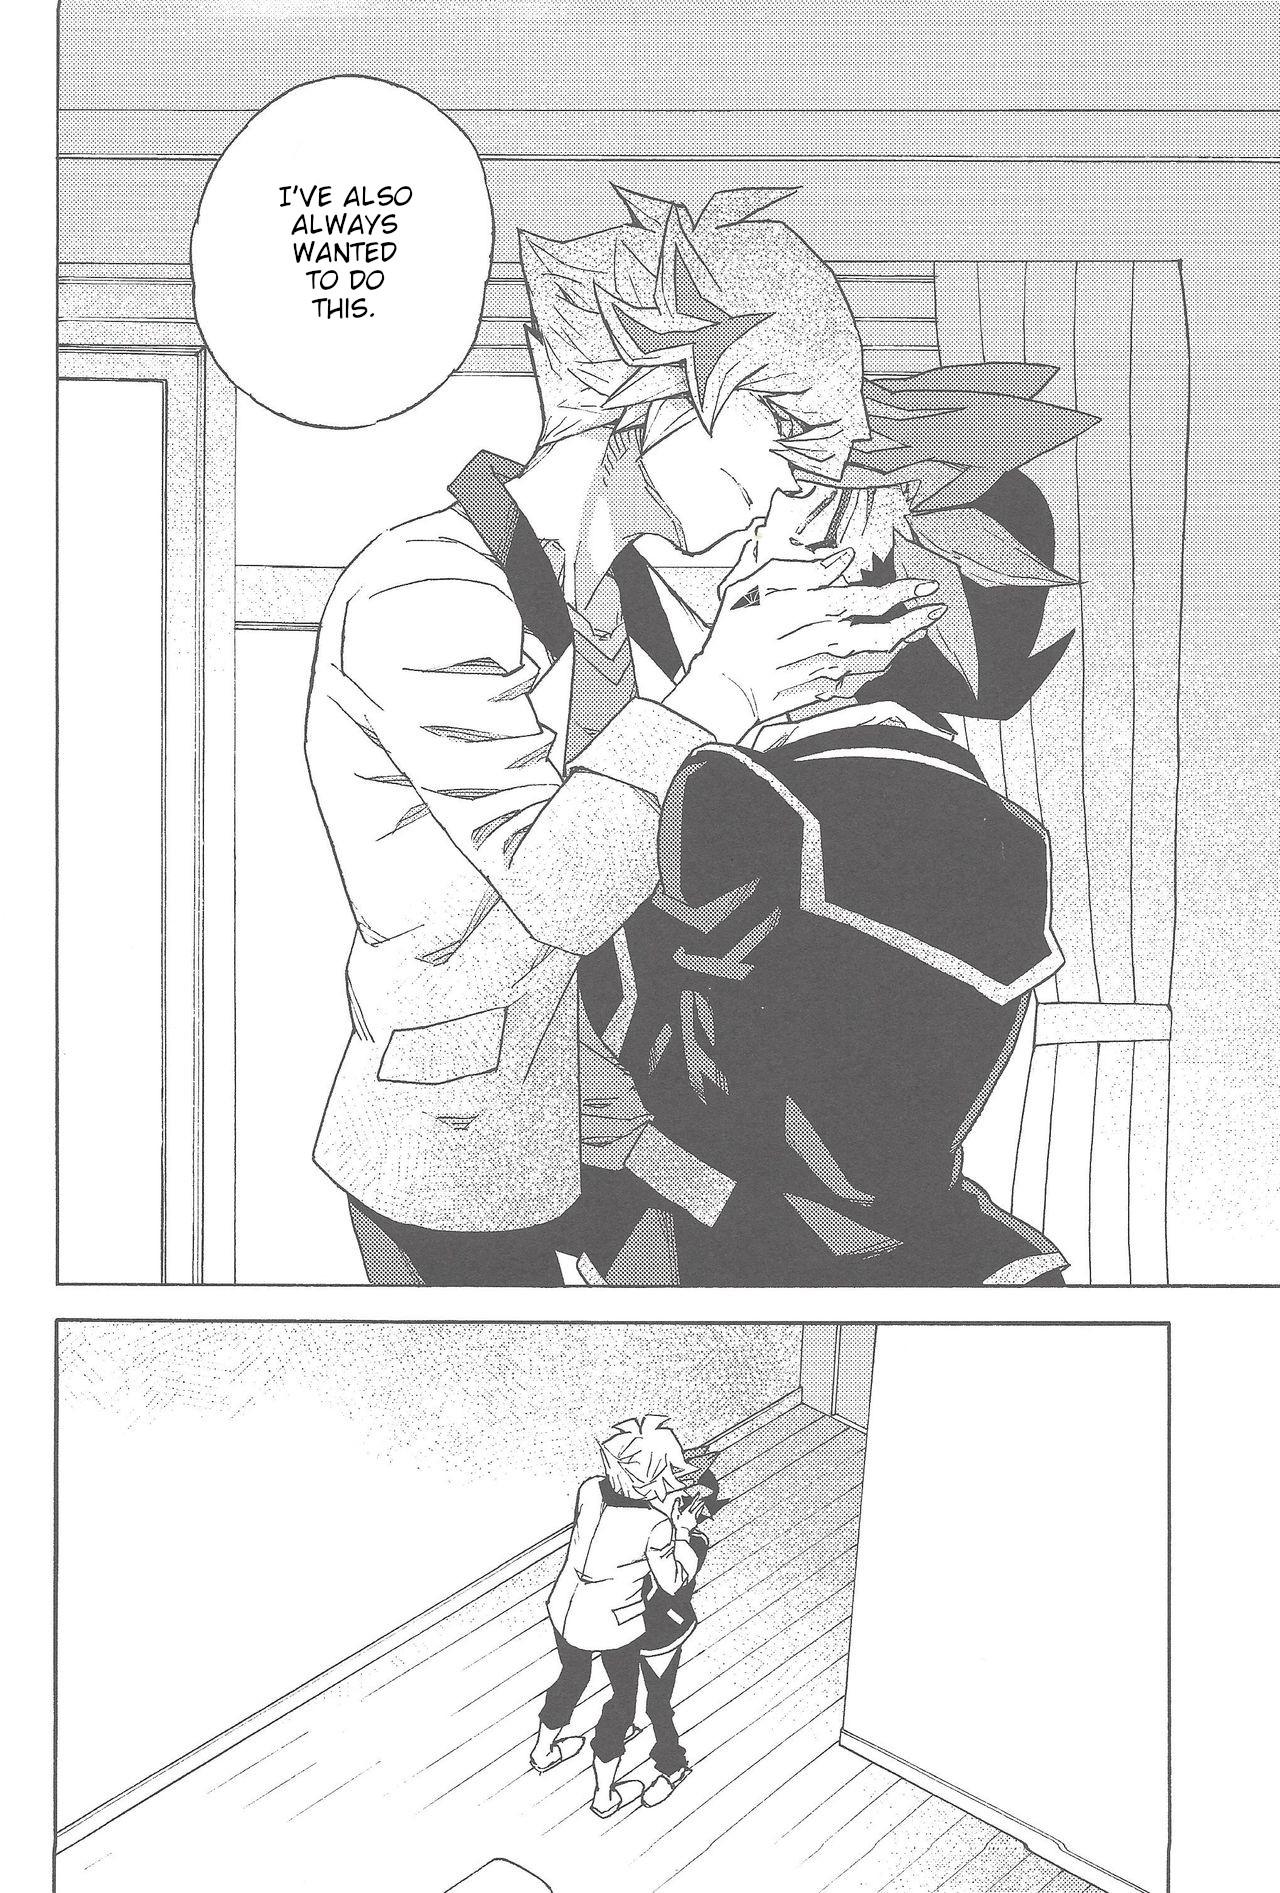 From twoway traffic - Yu-gi-oh vrains Men - Page 9